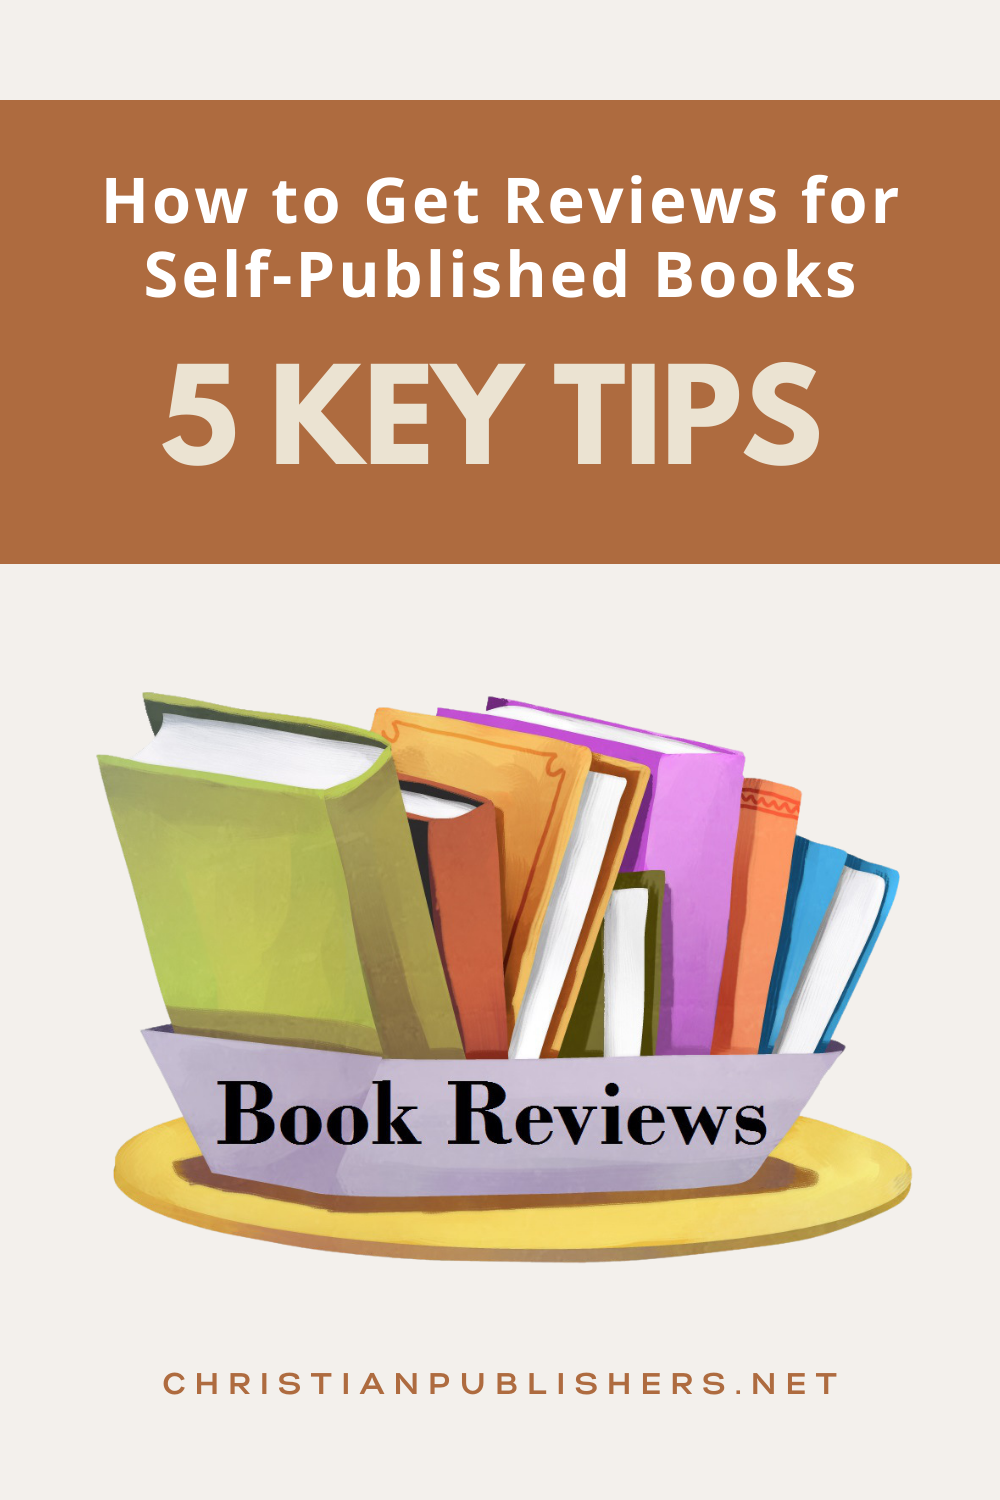 5 Key Tips to Help You Get Book Reviews